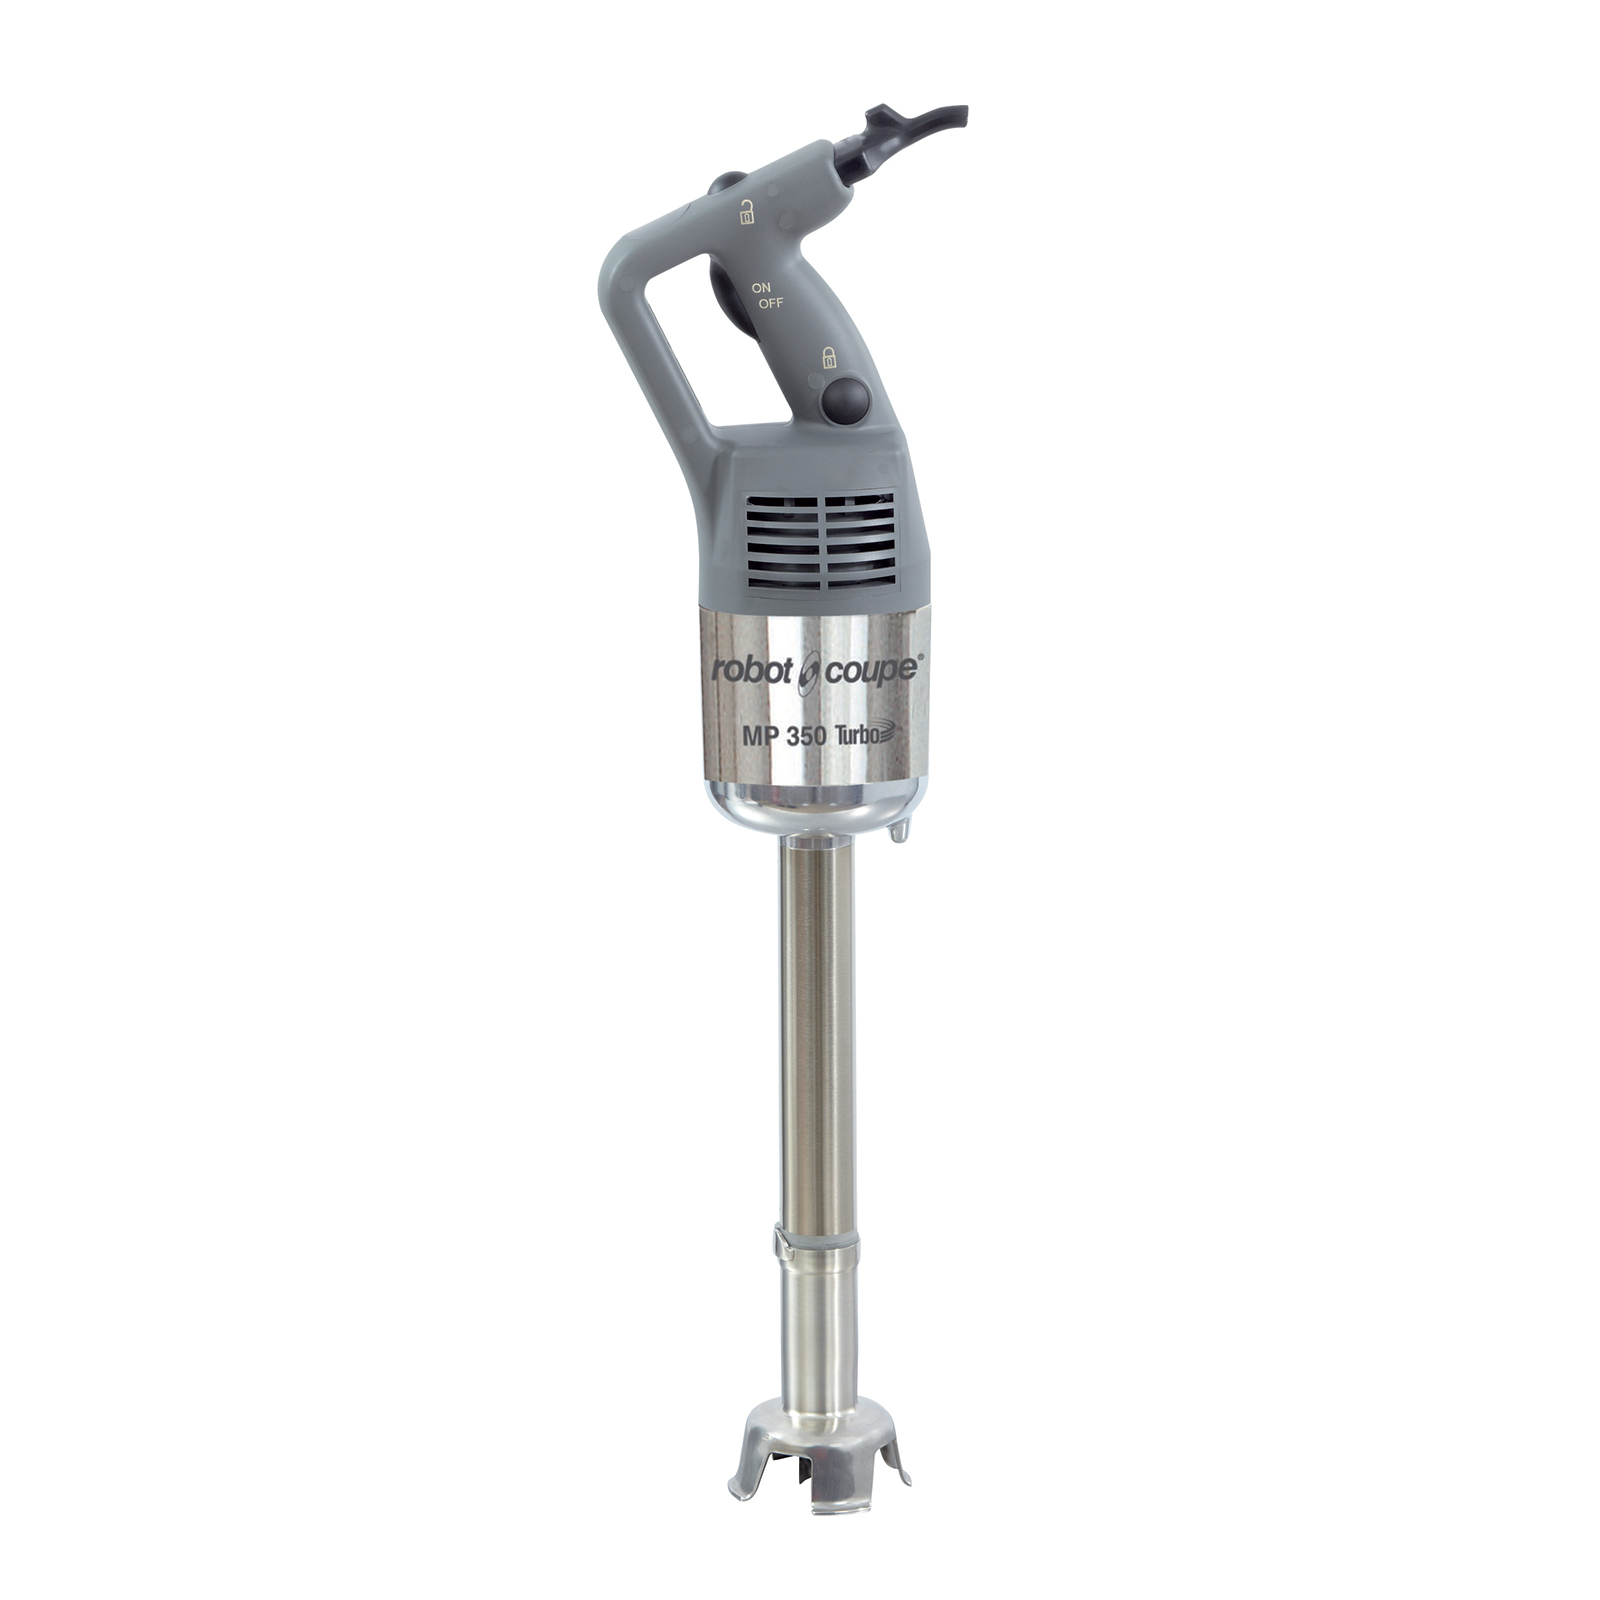 Commercial Power Mixer, hand
held, 14&#39; s/s shaft,
removable s/s foot &amp; knife,
ergonomically shaped handle,
120V, 60 HZ, 5.0 amps, 1ph,
550 watt, single speed,
10,000 RPM